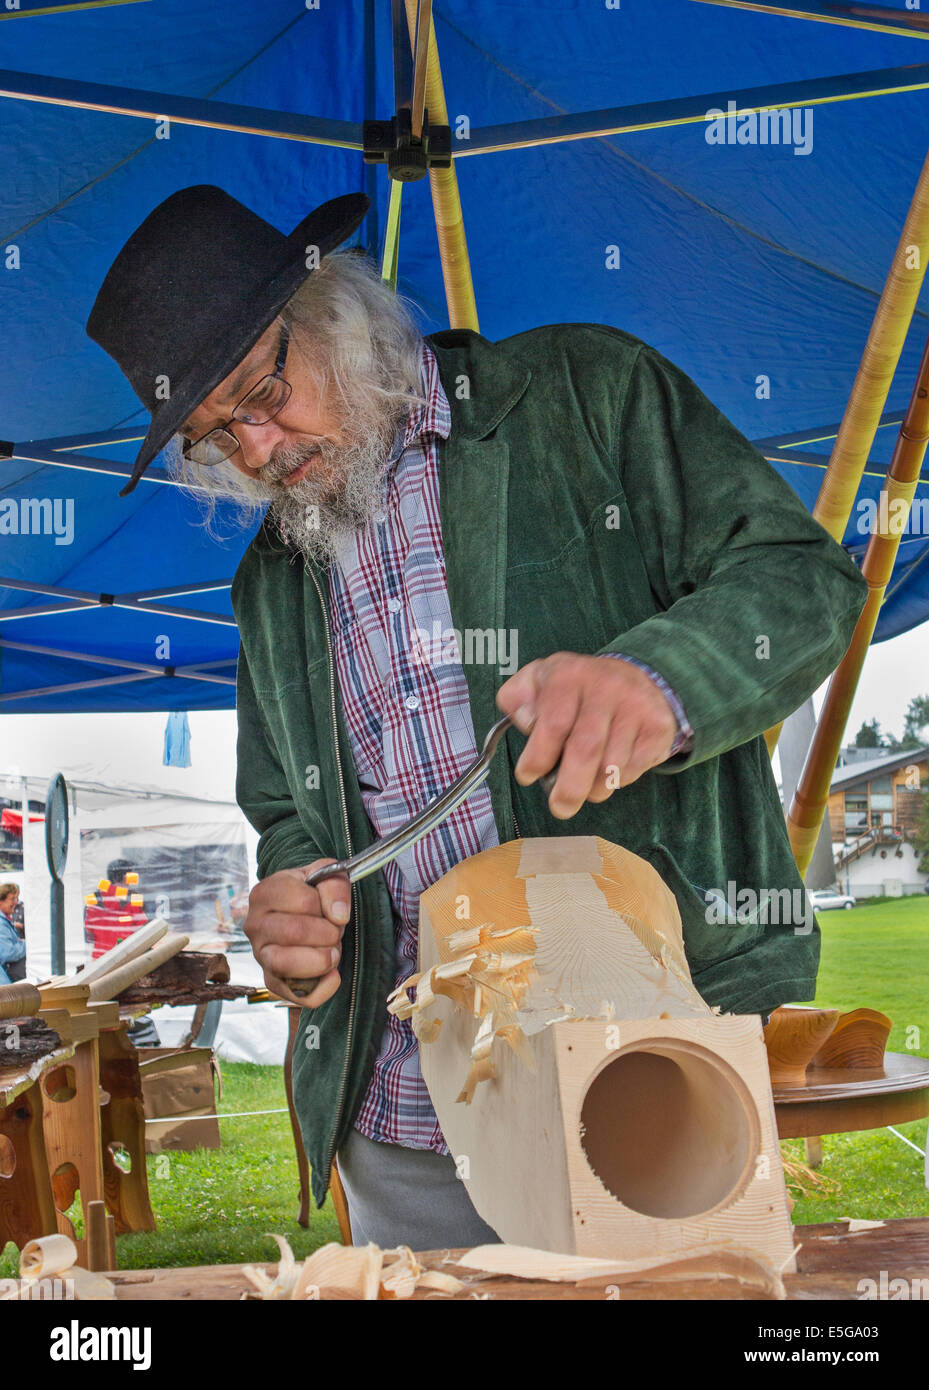 Carving the 'horn of an alphorn from a solid block of wood. Slight motion blur on the carver's hands Stock Photo